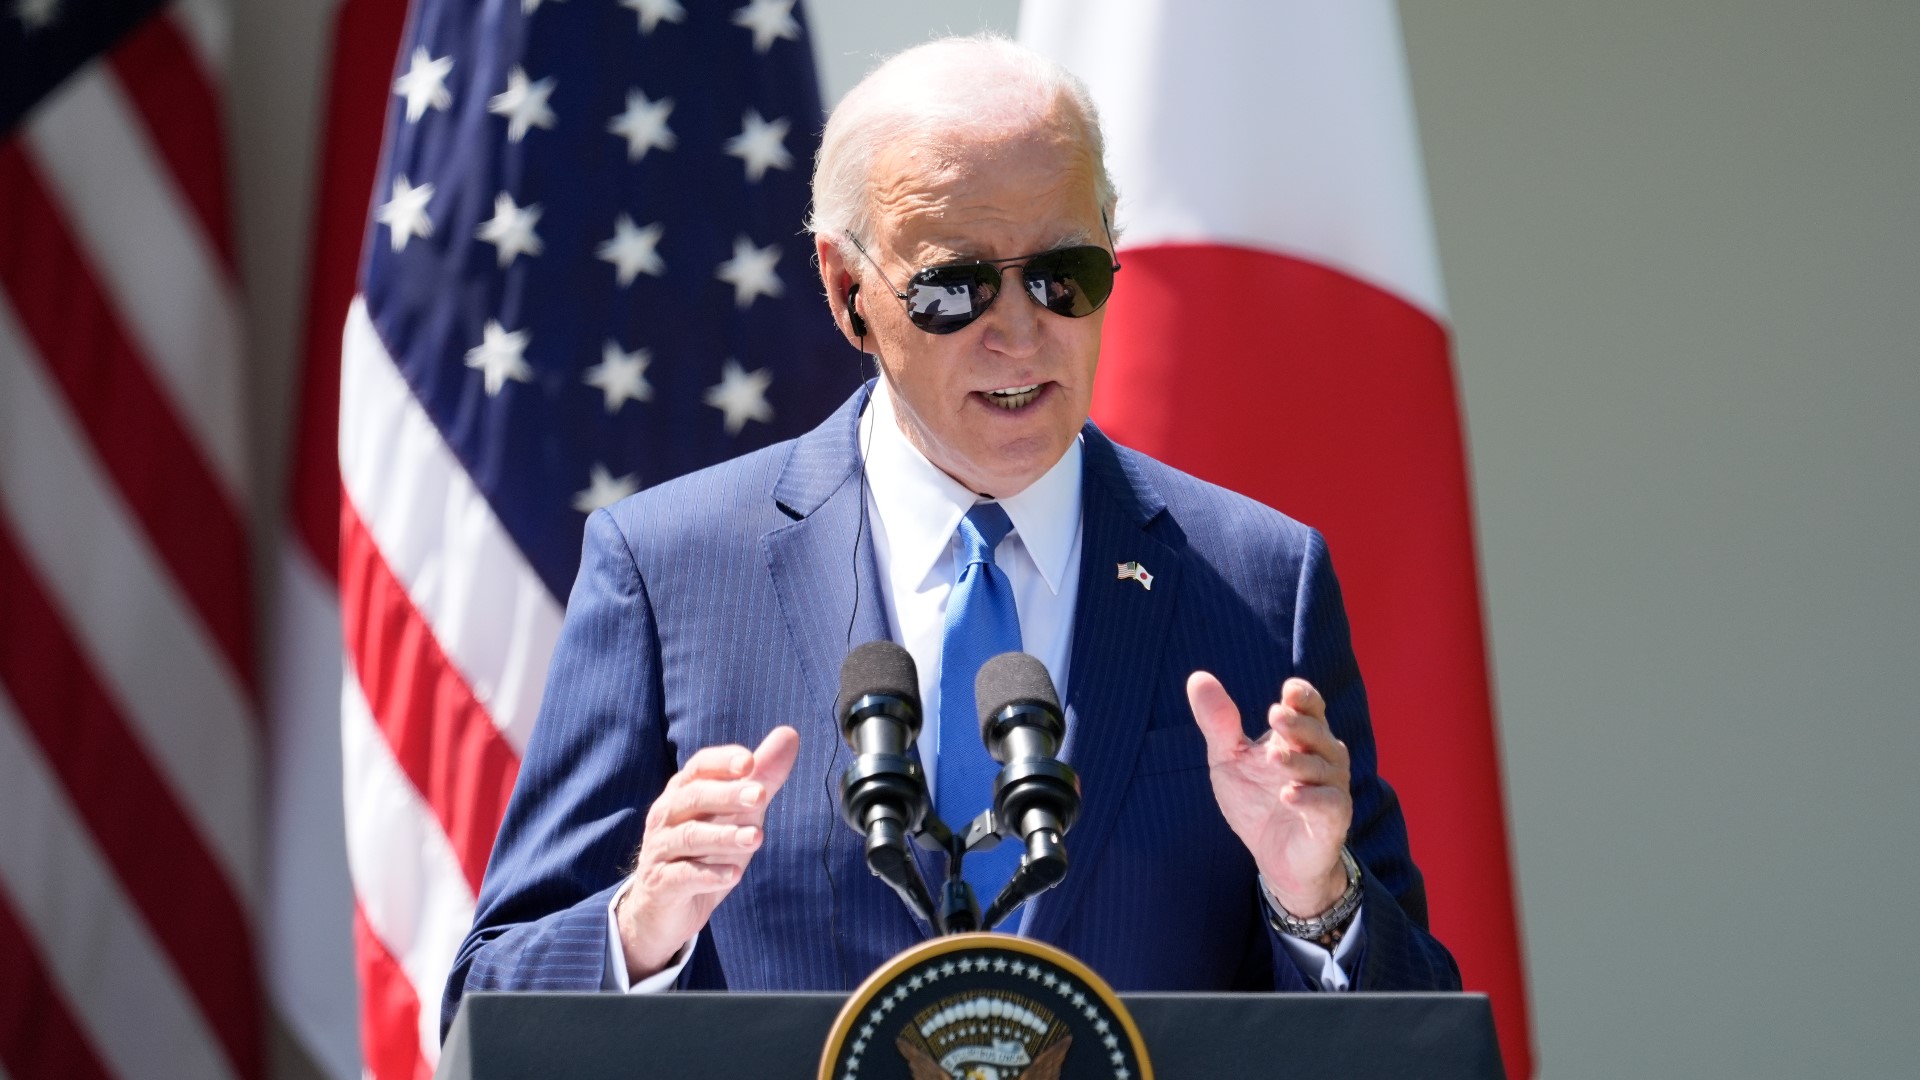 The White House reports President Biden will be visiting Scranton next Tuesday.